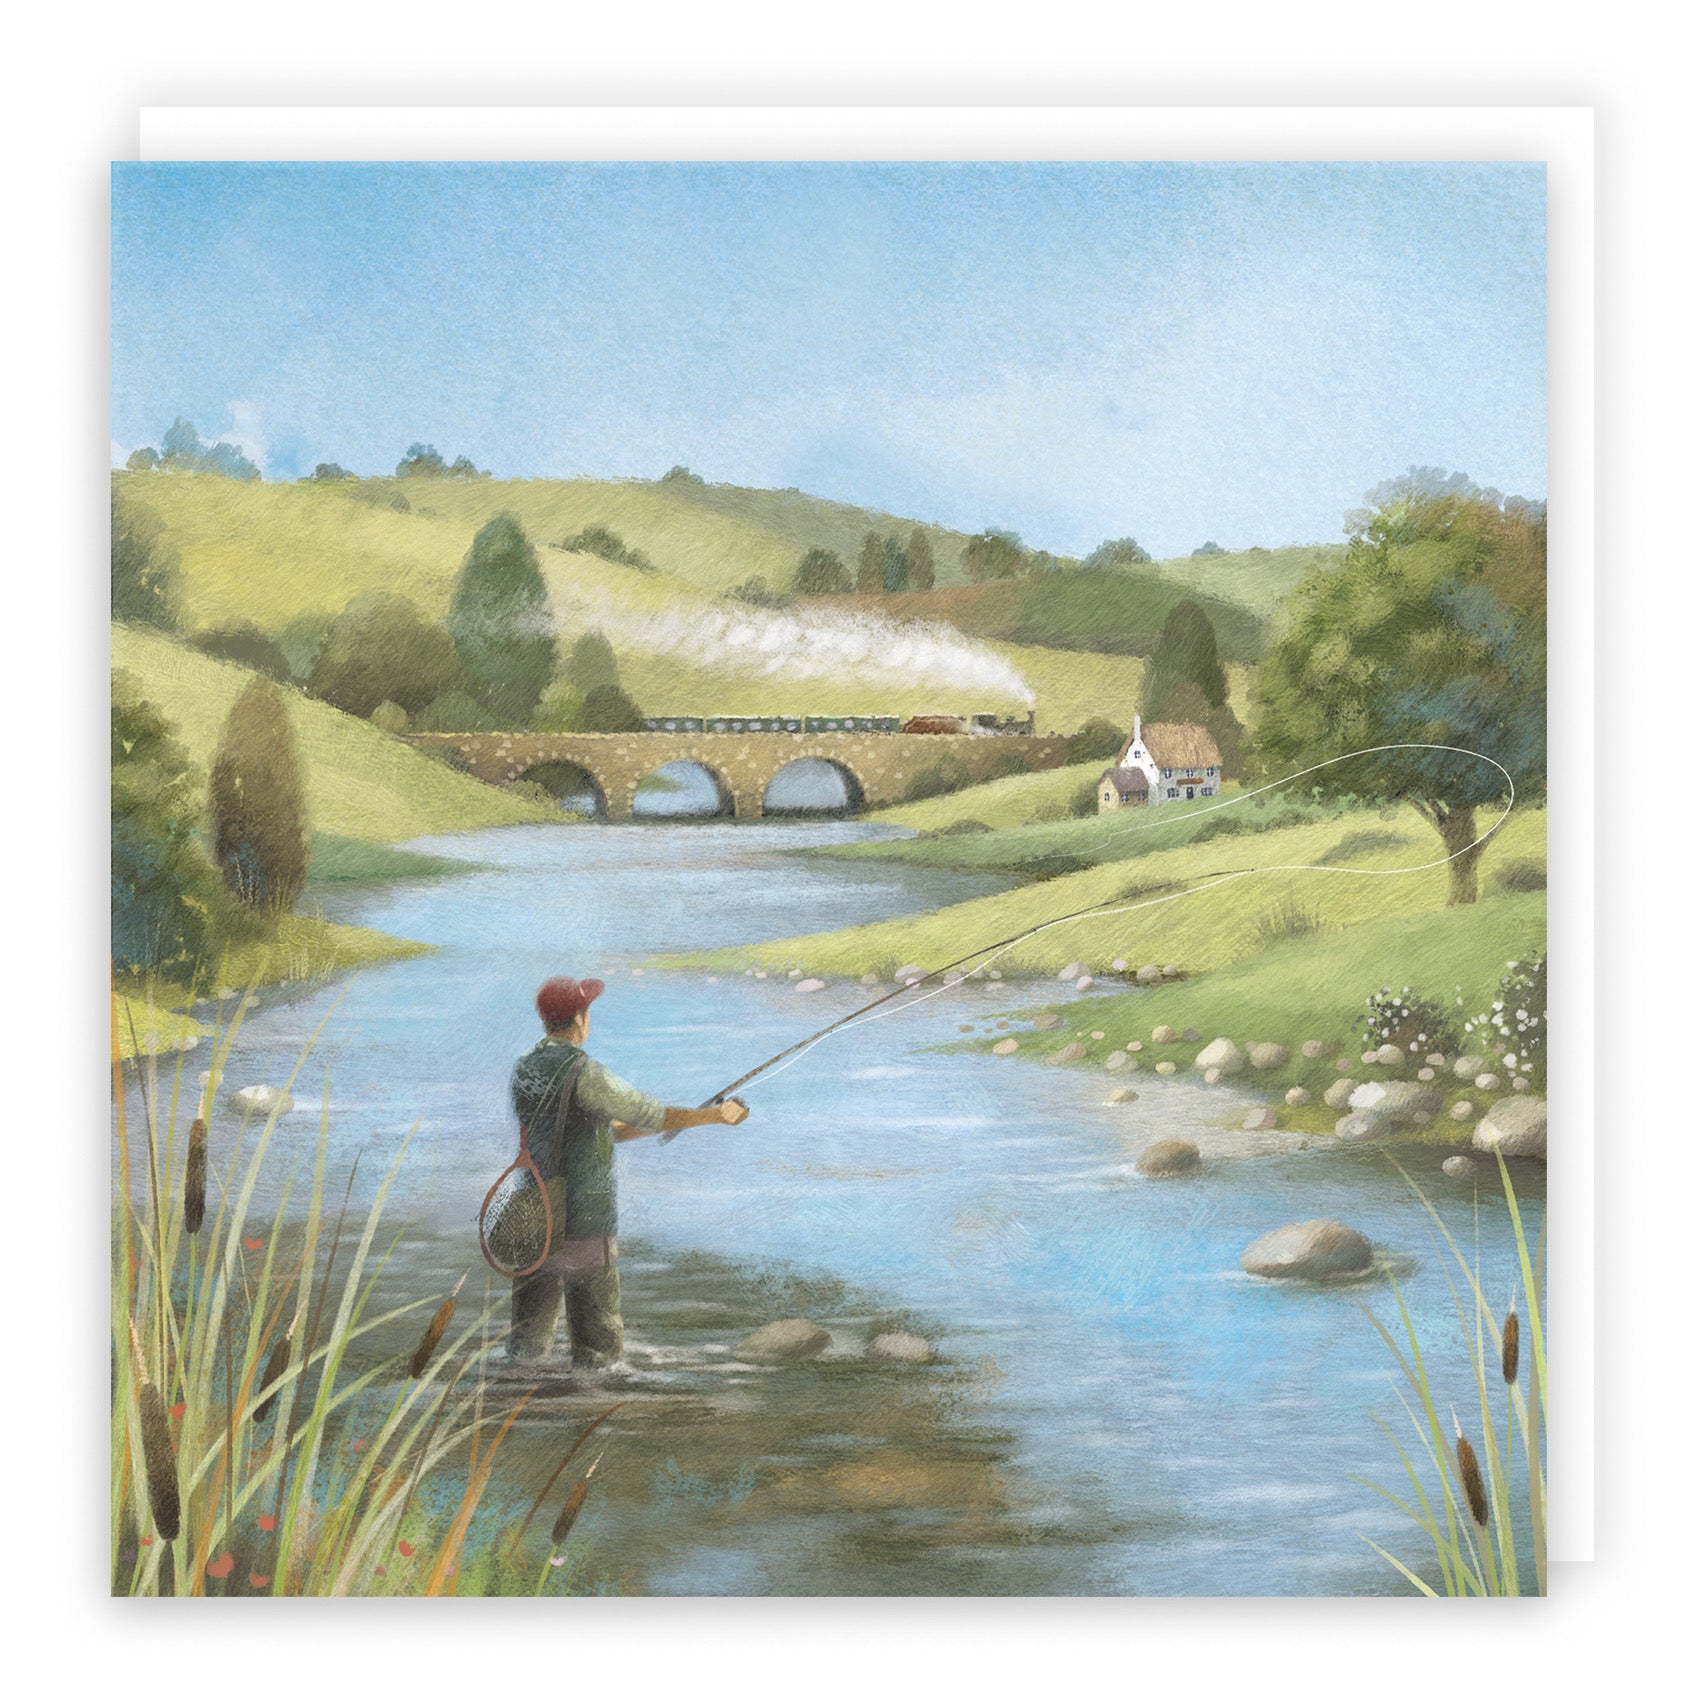 Fly Fishing Blank Any Occasion Card Milo's Gallery - Default Title (B0CQWRNKVB)